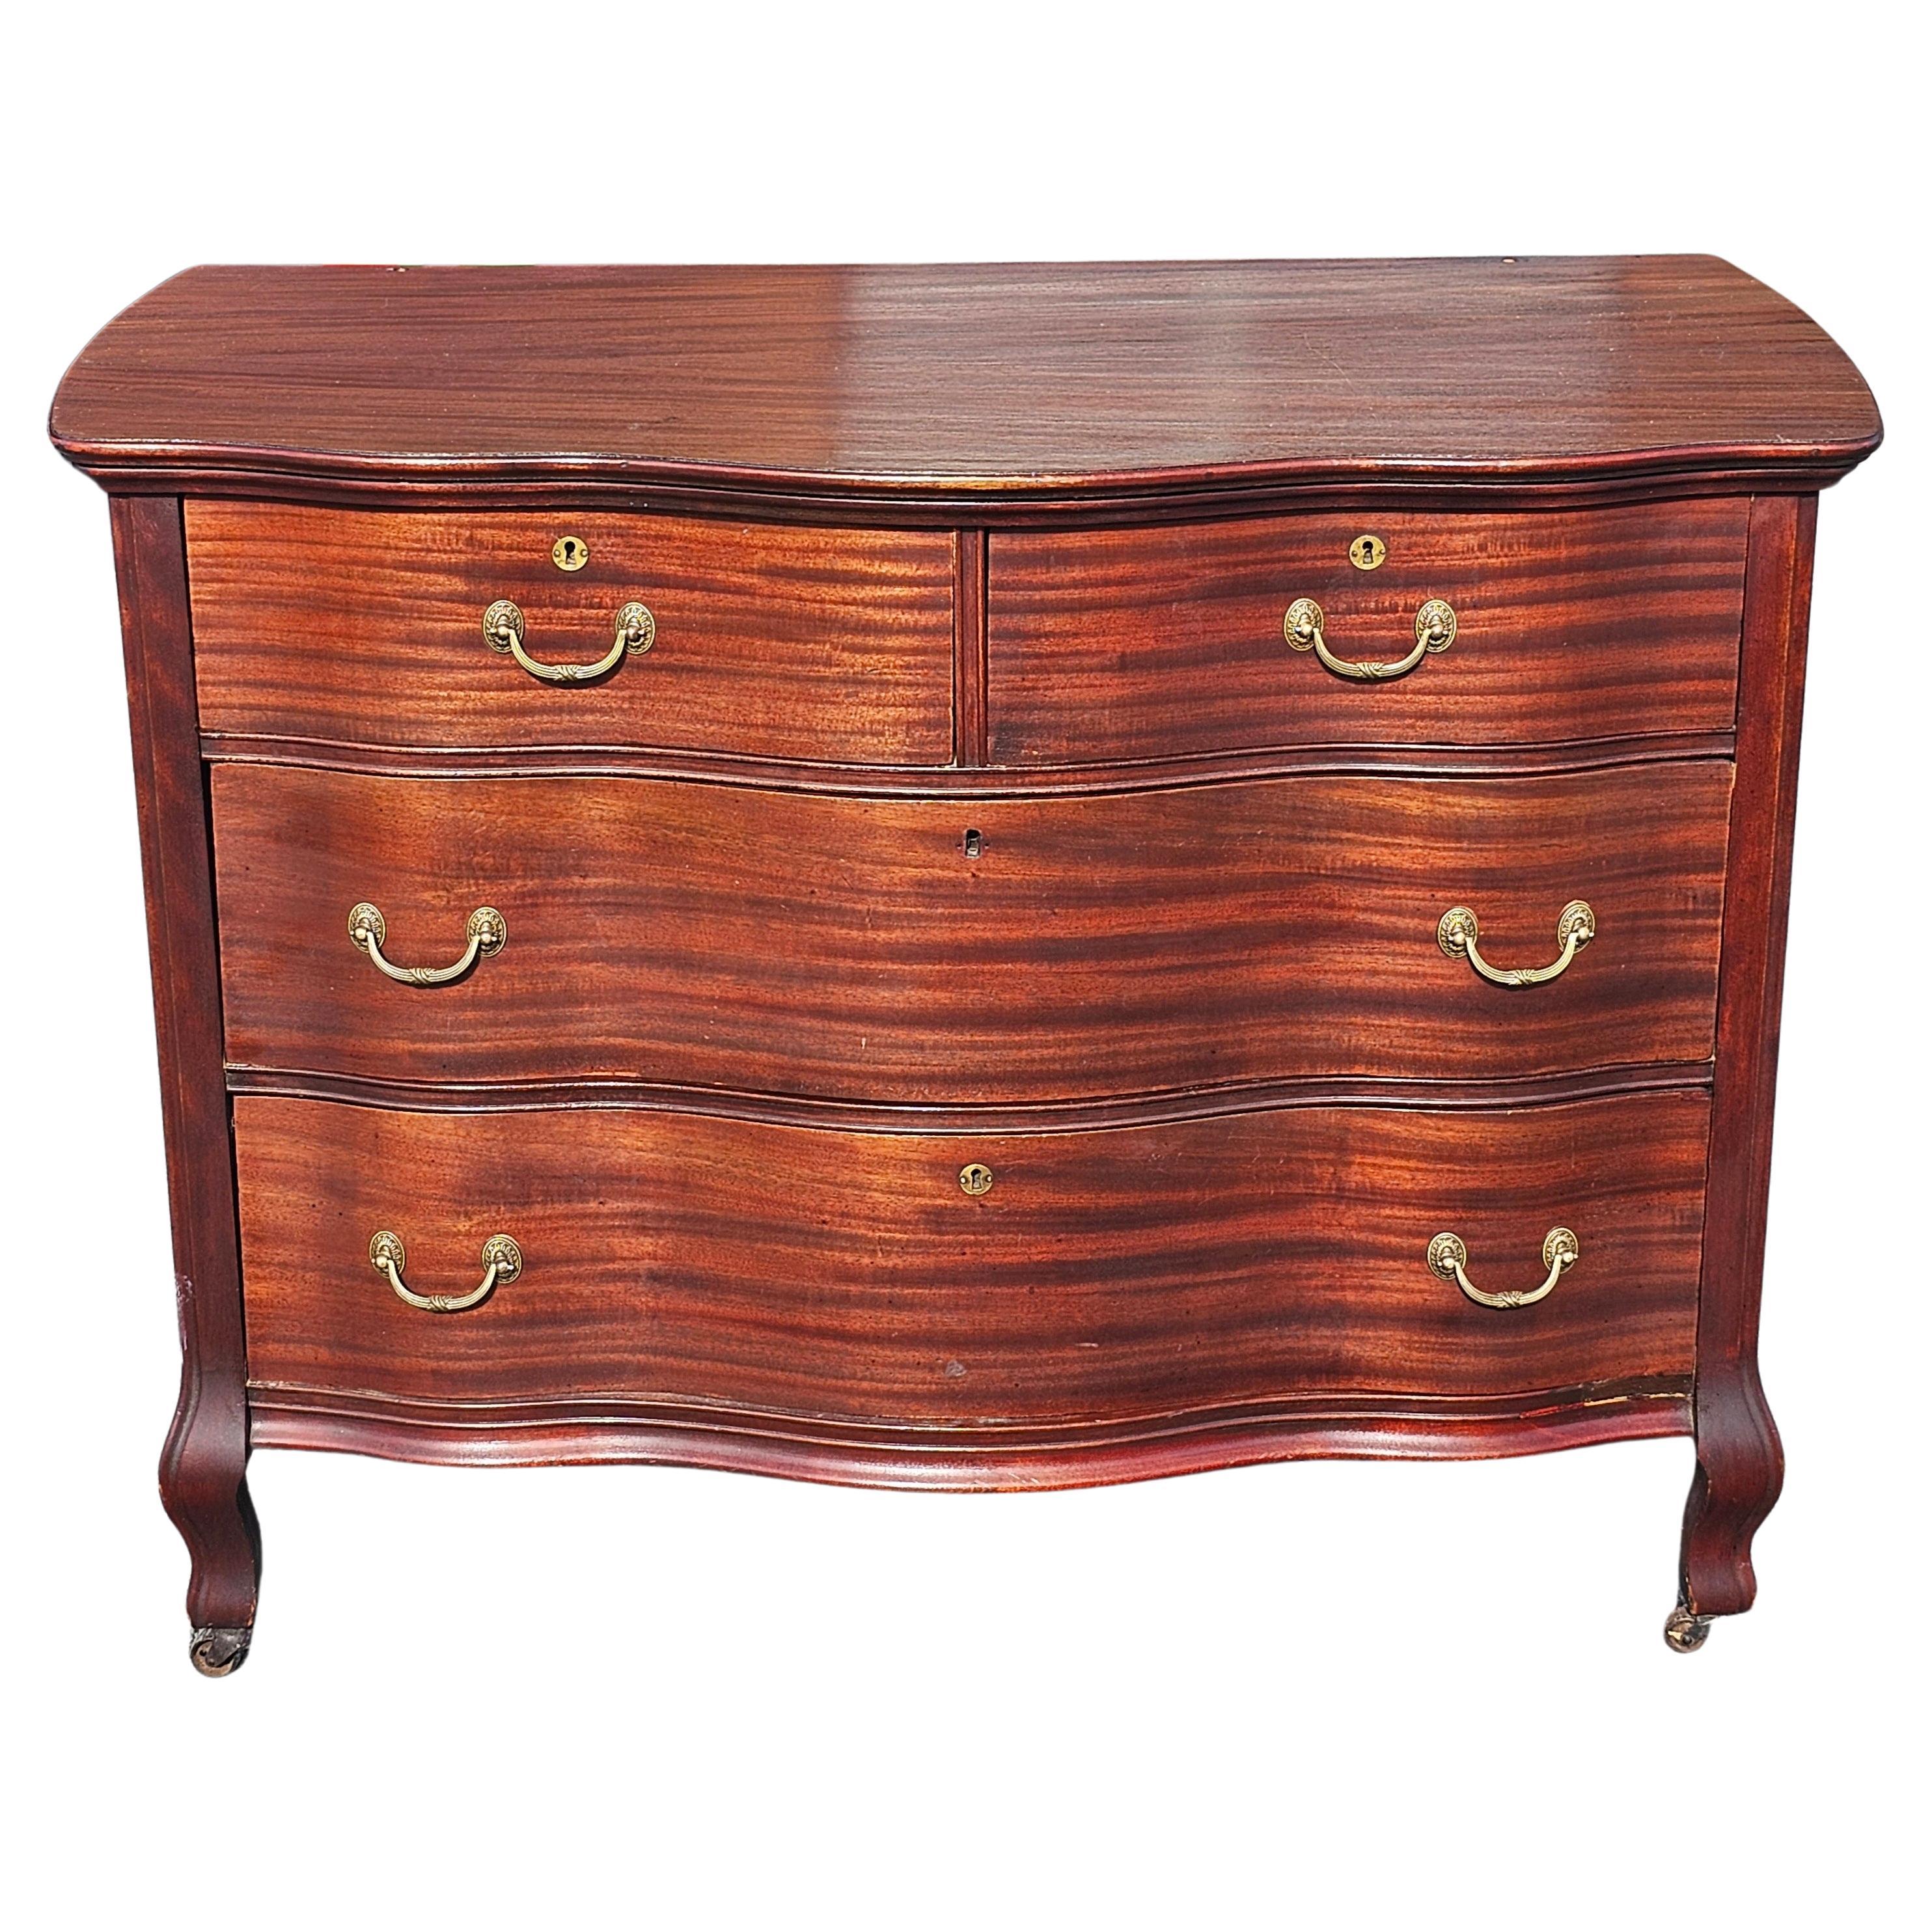 An Early 20th Century Widdicomd Solid Genuine Tiger Mahogany Serpentine front commode Chest of drawers on Wheels.  Deep Dovetail drawers working flawlessly. Matching mirror available in a separate listing. Measures 45